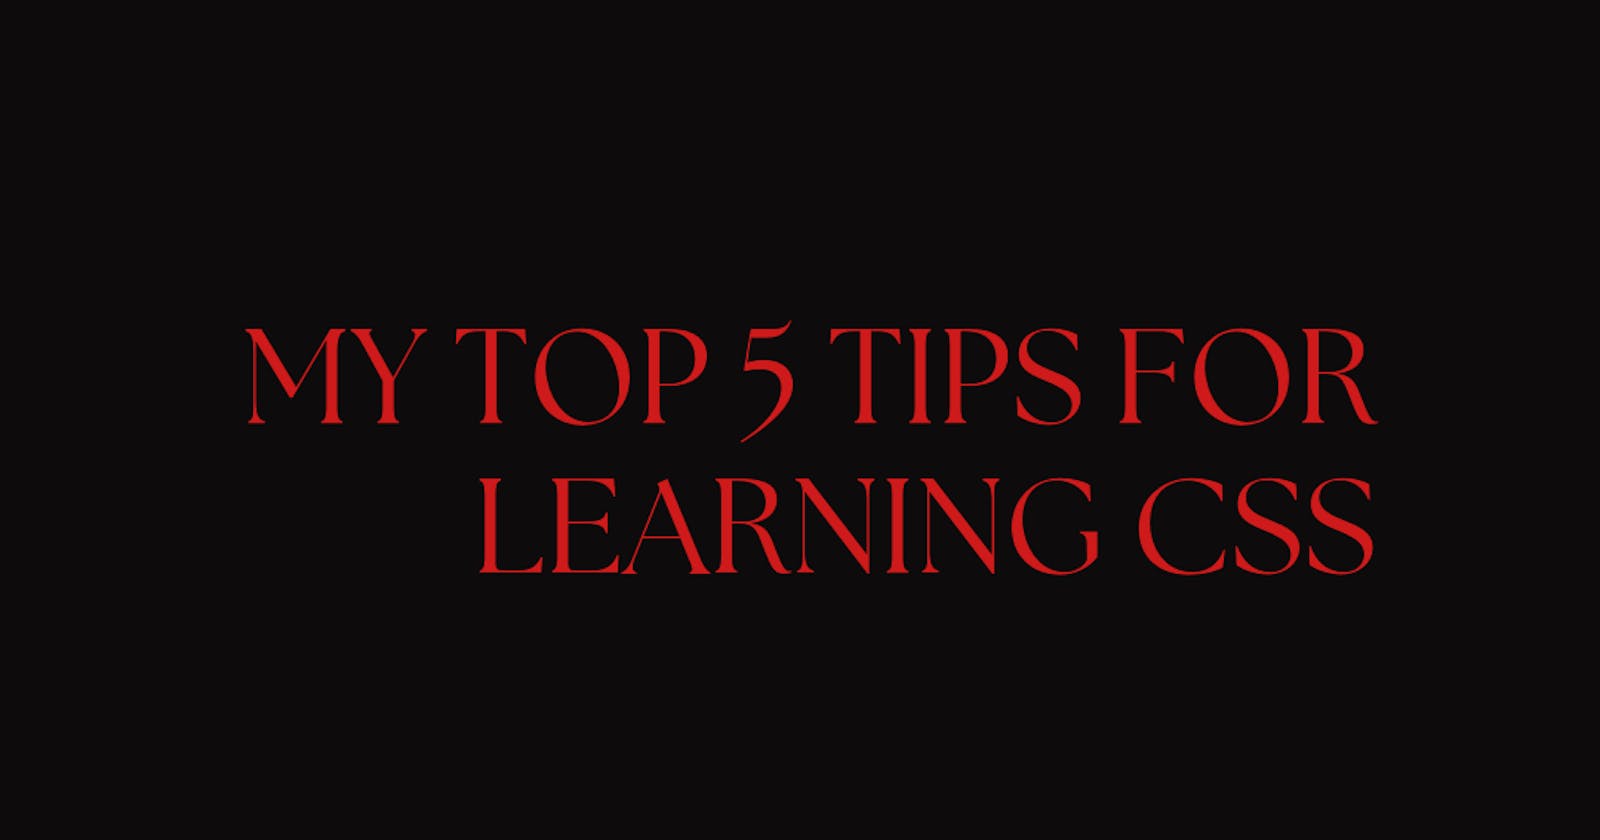 My top 5 tips for learning CSS